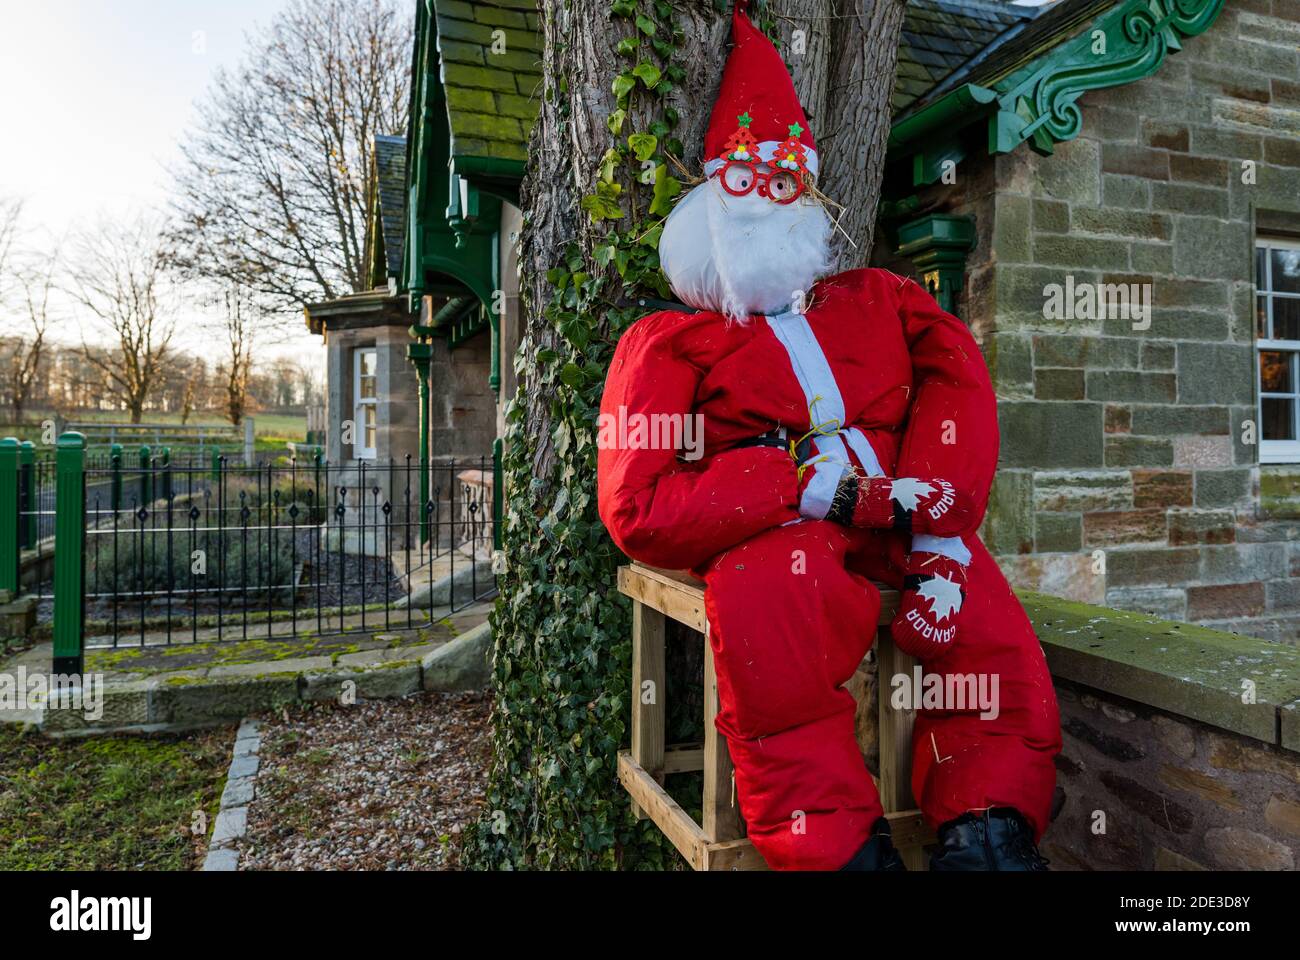 East Lothian, Scotland, United Kingdom, 28th November 2020. Christmas decorations: A life size Santa scarecrow figure has appeared in Dirleton Village as art of the community Christmas decorations Stock Photo